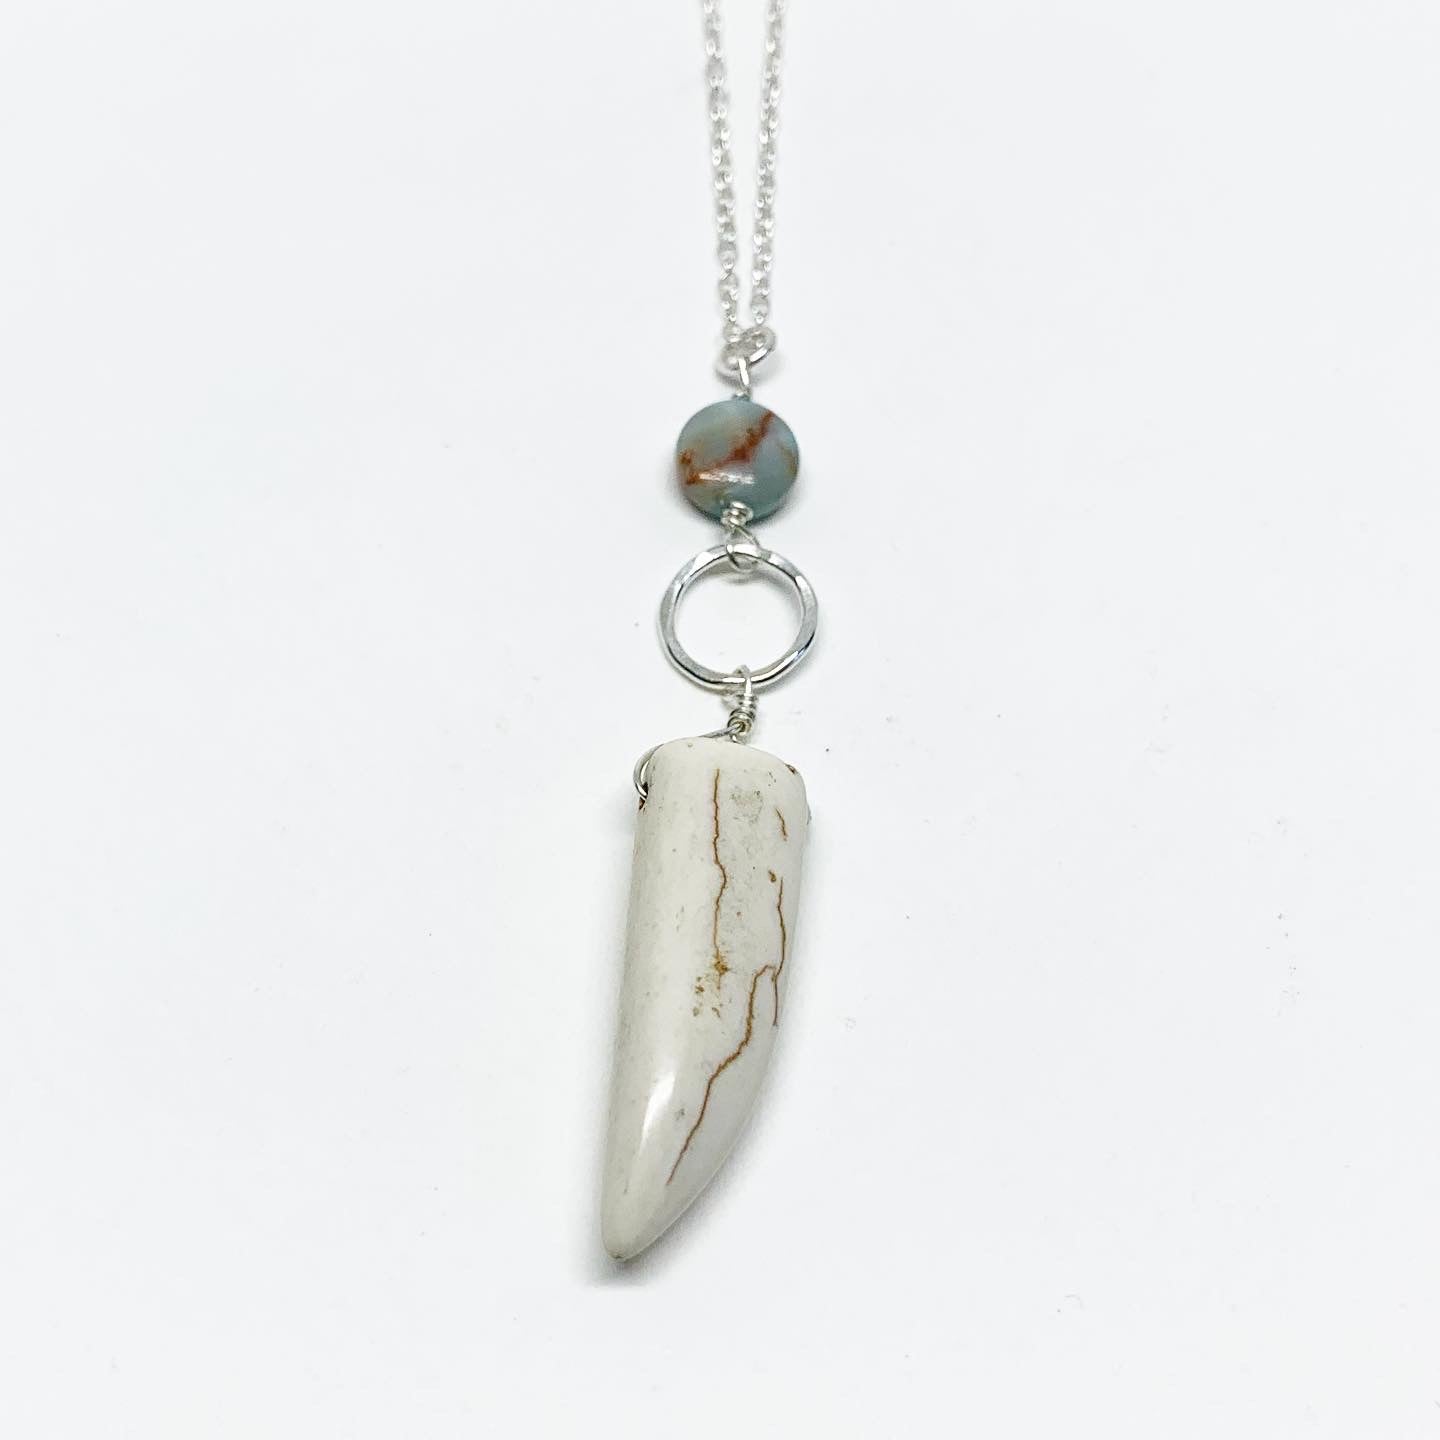 Turquoise and Howlite Charm Necklace - Jennifer Cervelli Jewelry